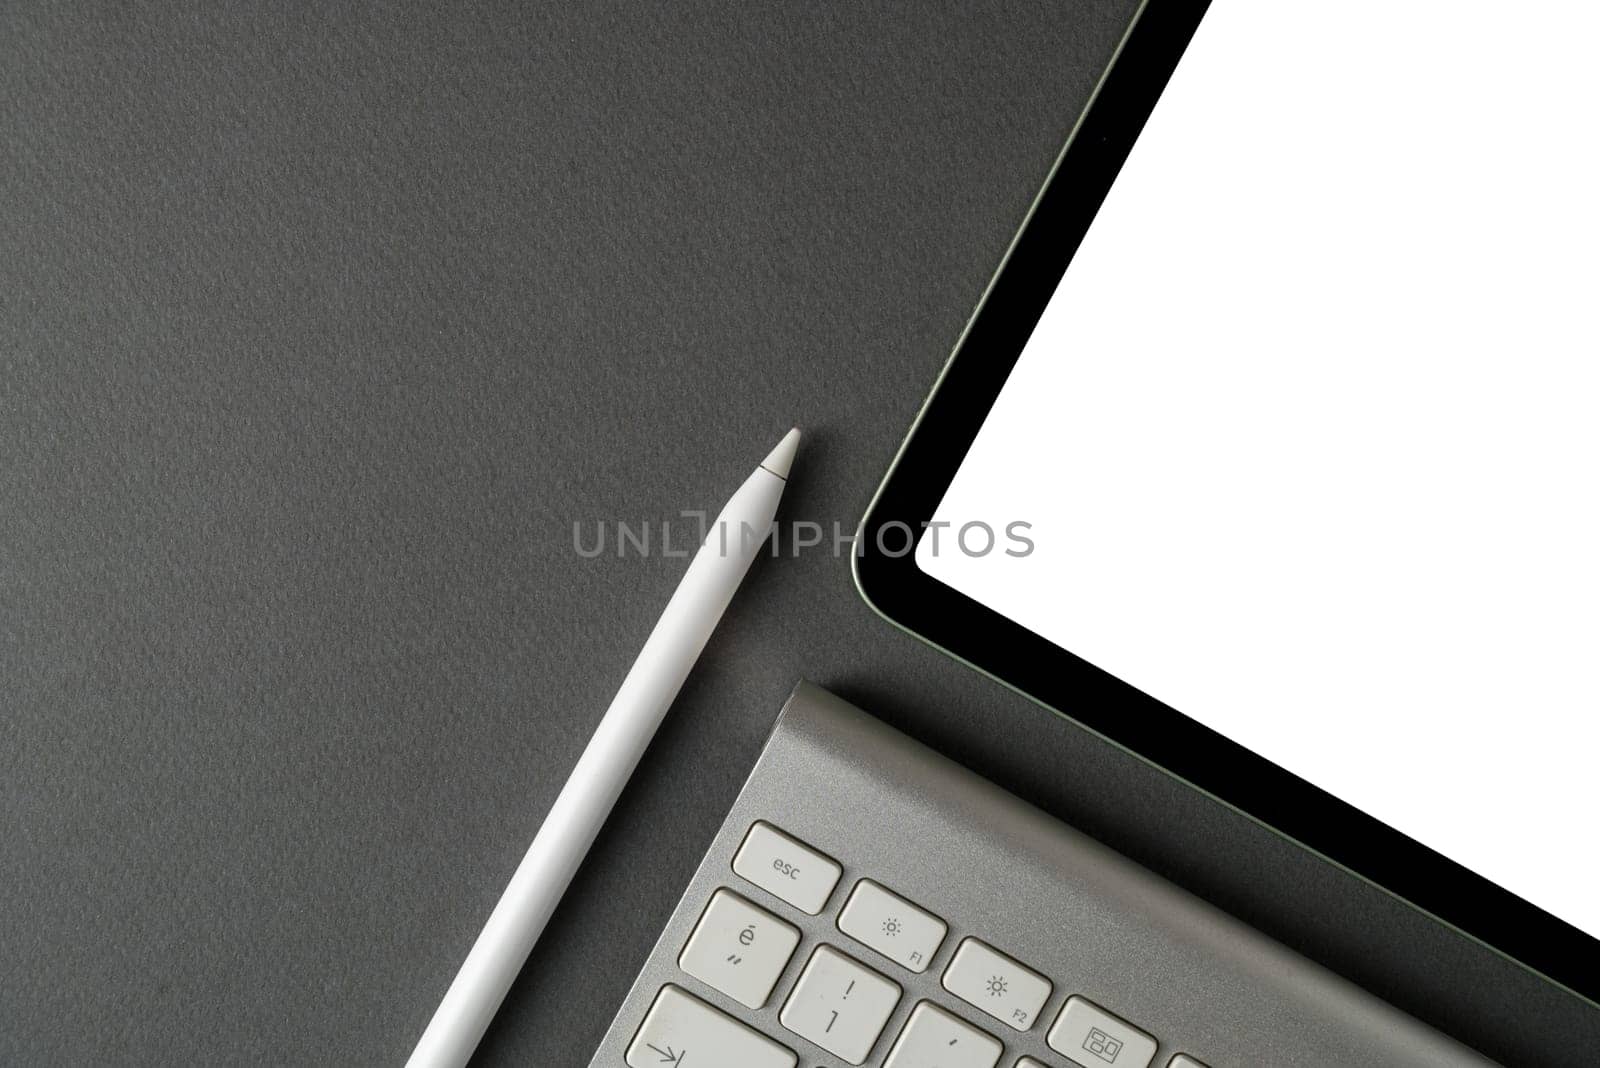 Tablet with blank screen, keyboard and stylus pen on dark gray background by Sonat